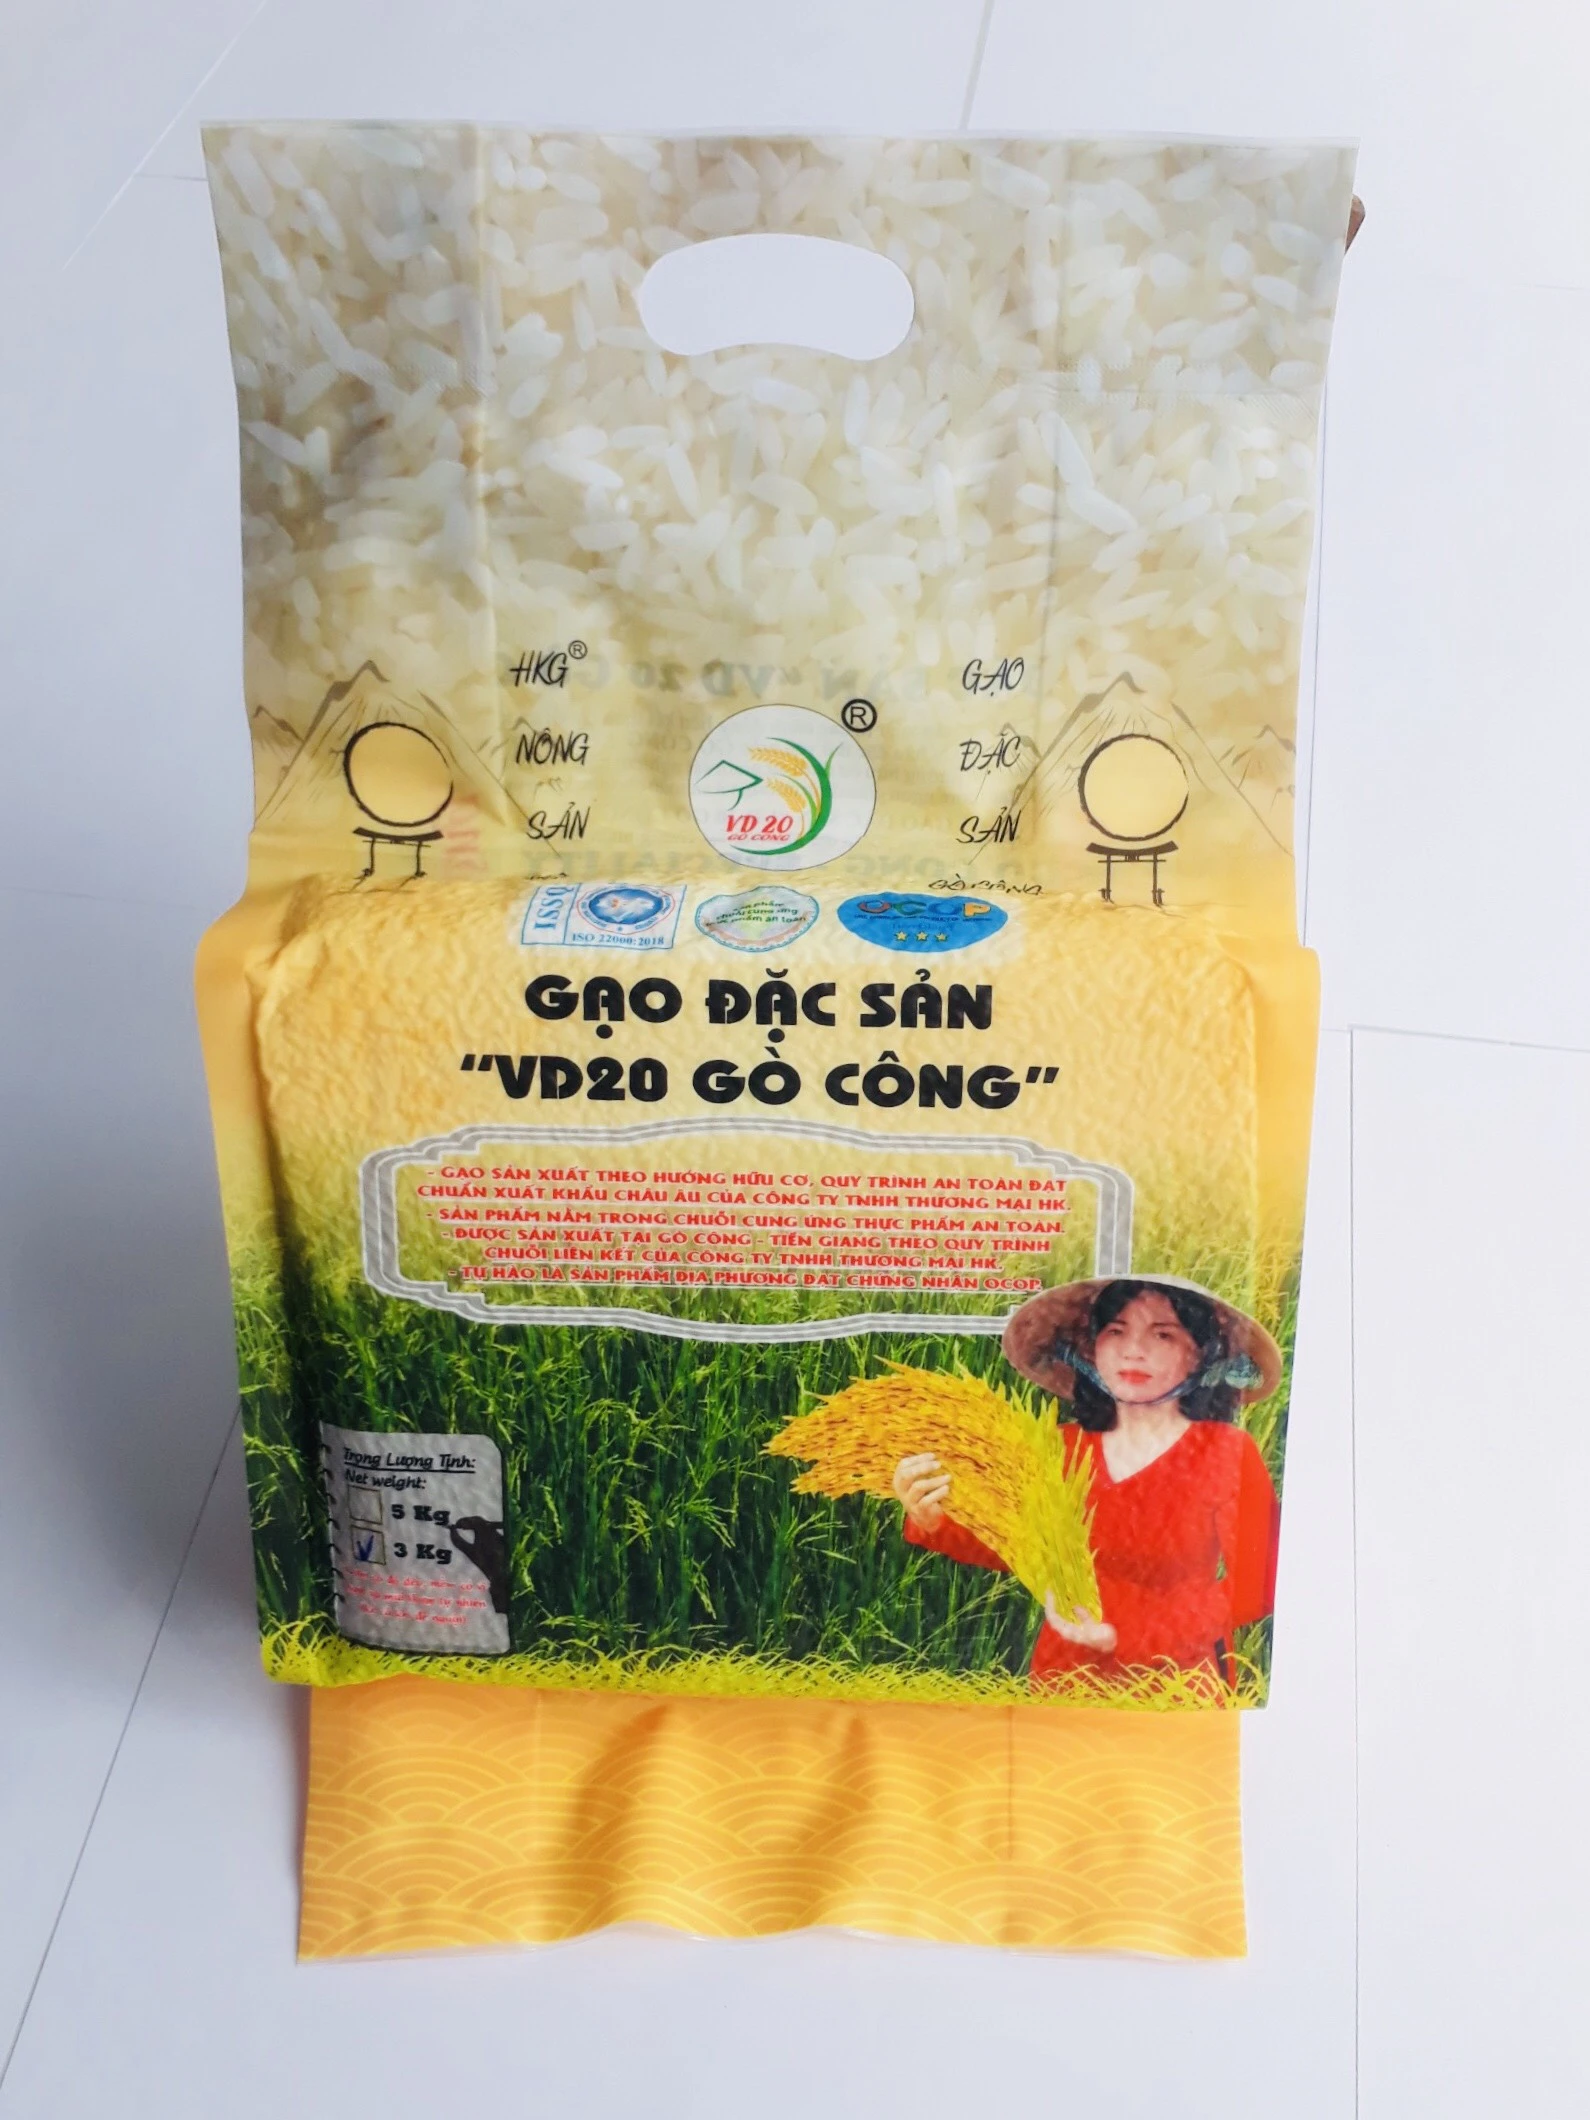 0.1% Admixture HK Green Exporting Products Short-Grain Dried Soft Rice Container Vietnam